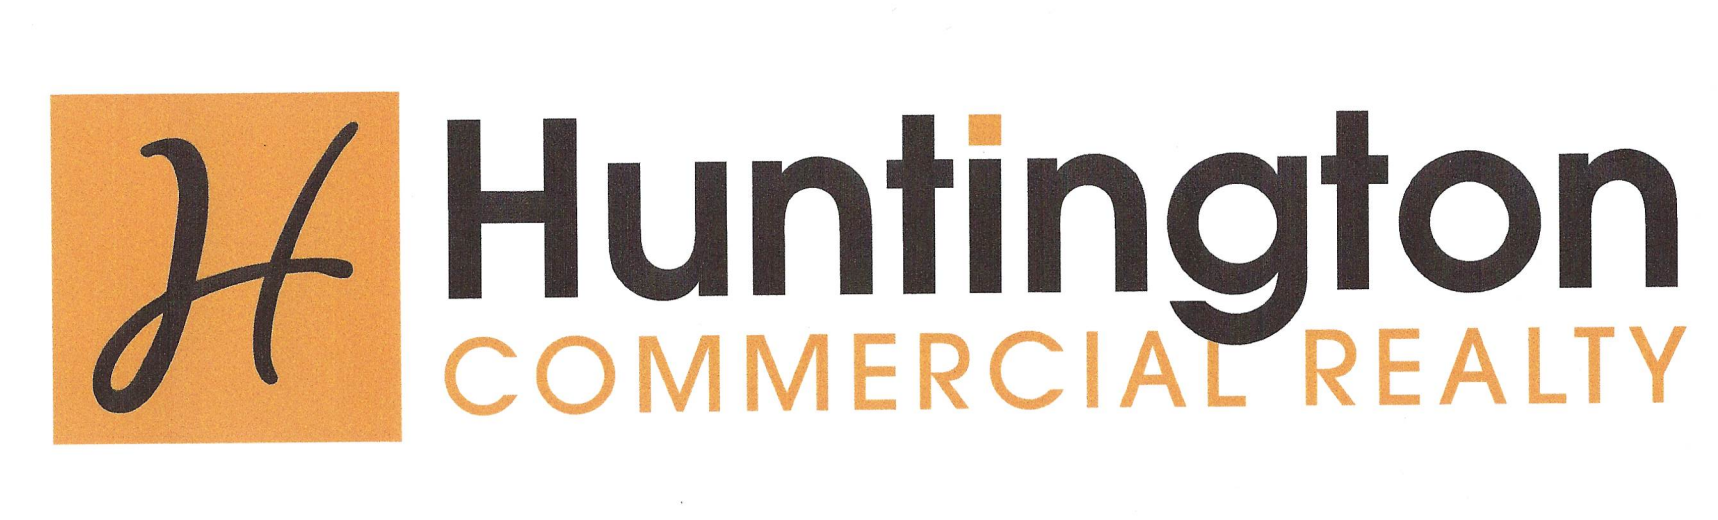 Huntington Commercial Realty